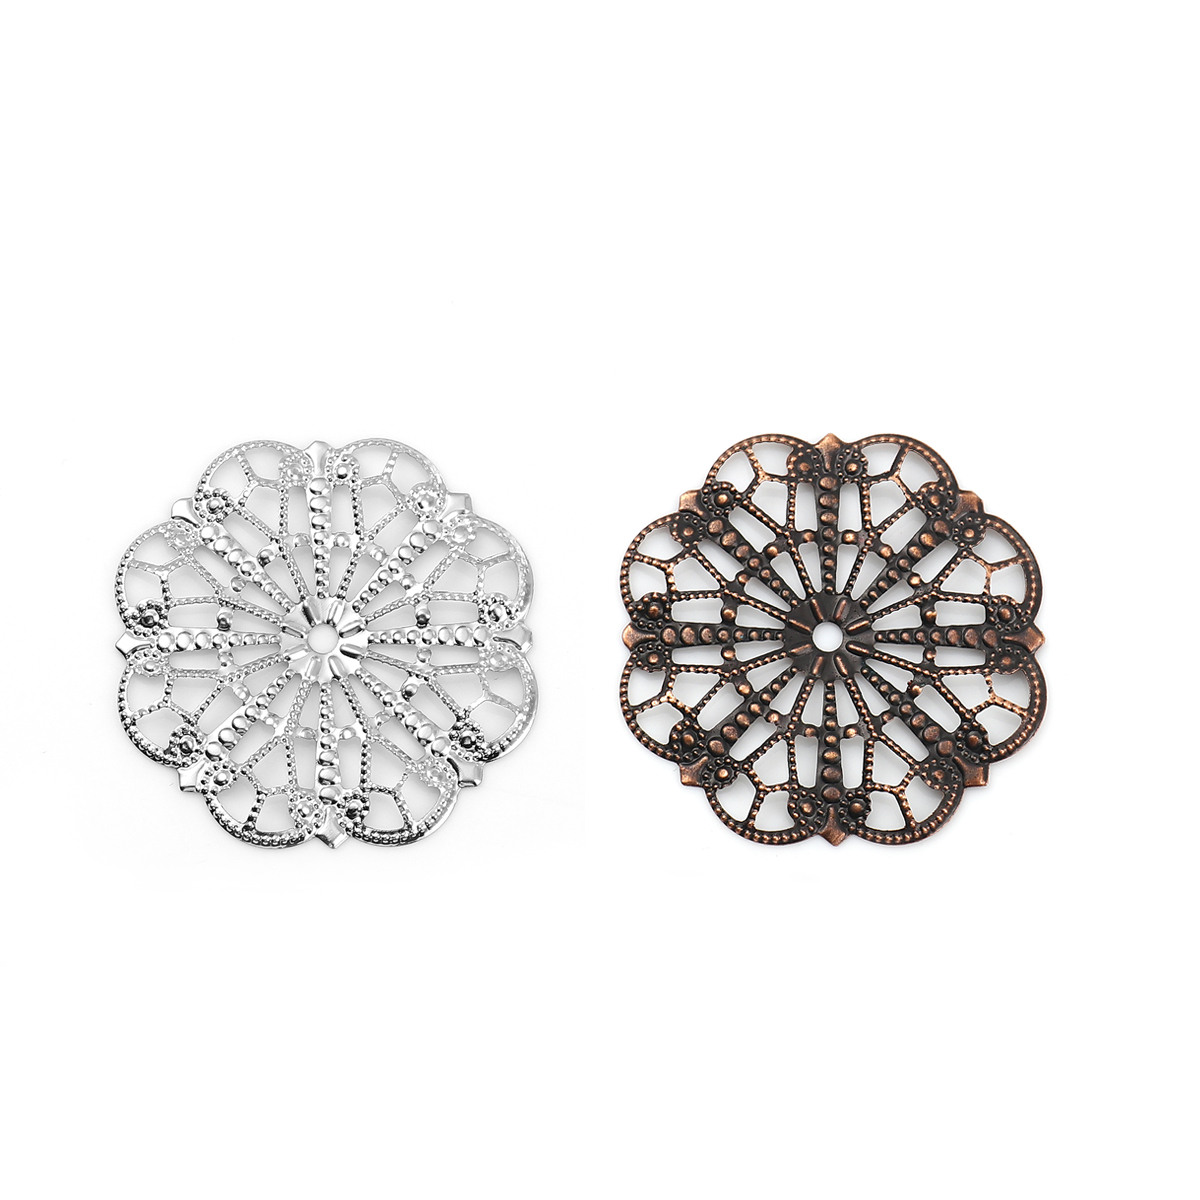 Picture of Iron Based Alloy Filigree Stamping Embellishments Flower Antique Copper 41mm(1 5/8") x 41mm(1 5/8"), 50 PCs